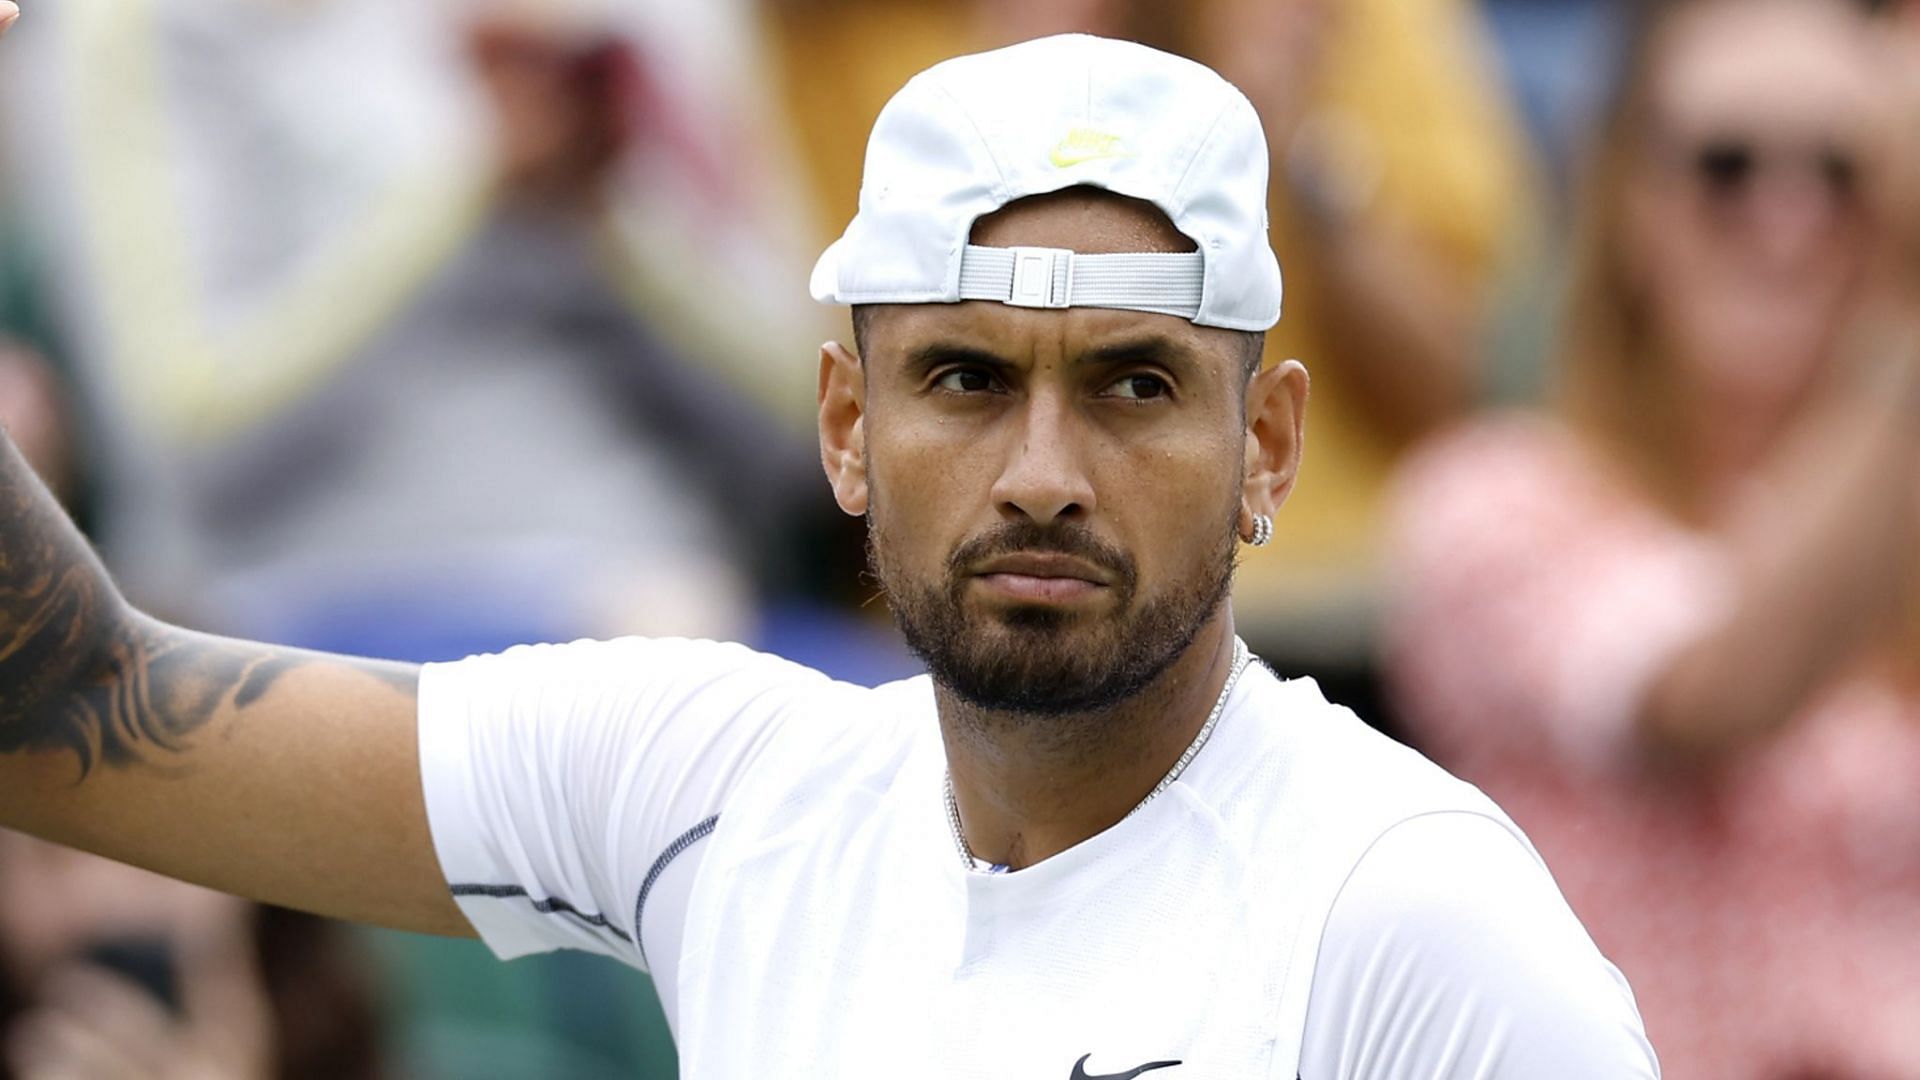 Nick Kyrgios served impeccably in the match